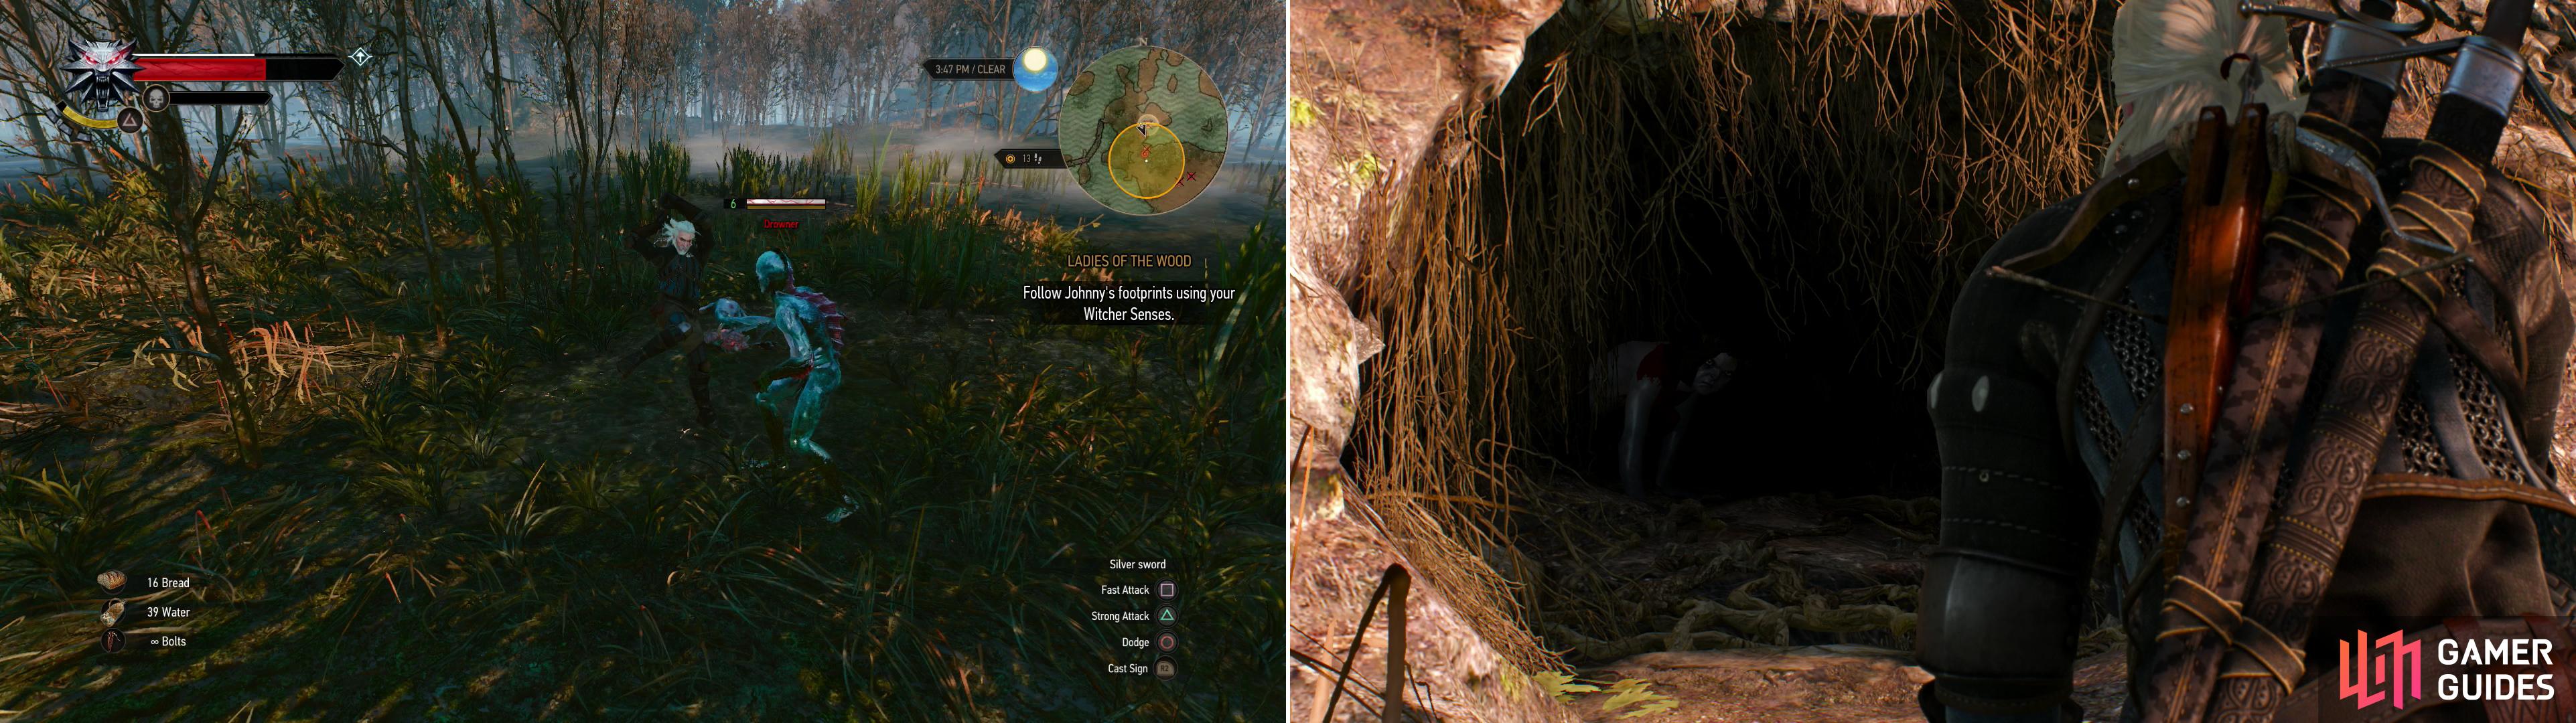 As you search for Johnny, beware of necrophages in the swamps (left). Eventually you’ll find Johnny in his barrow (right).